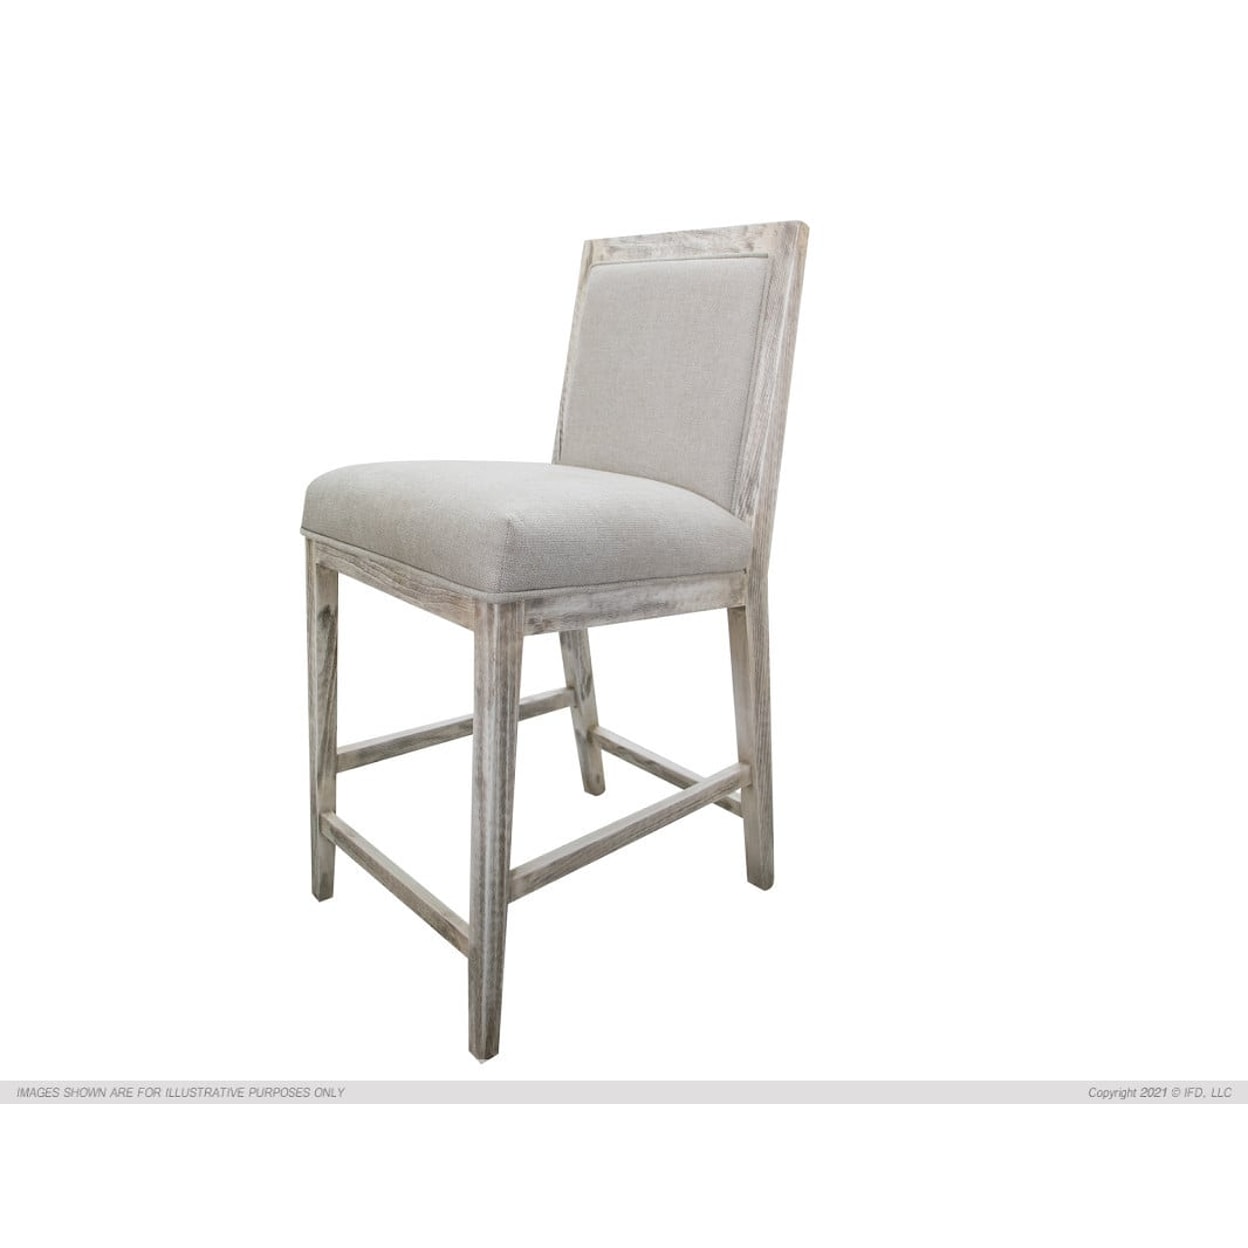 VFM Signature SEATING COLLECTION Upholstered Barstool